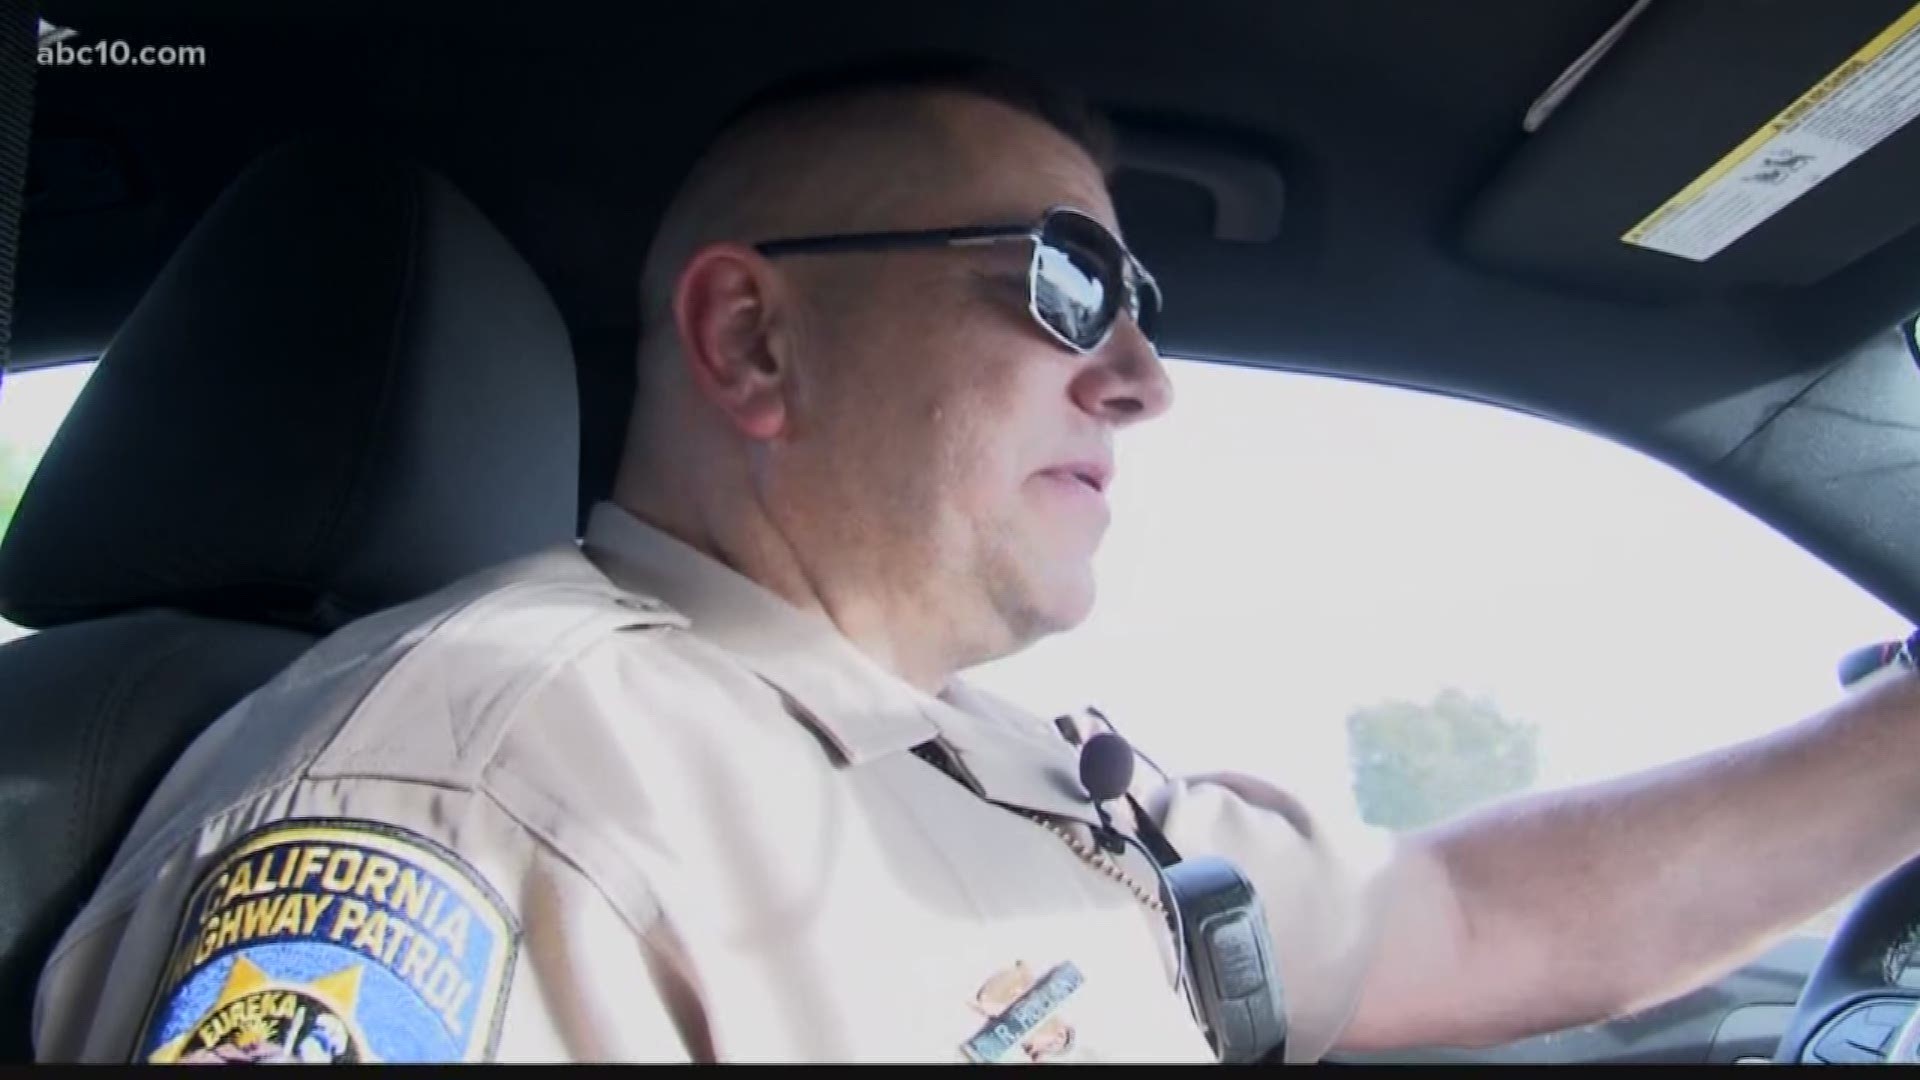 A day in the life of a CHP officer.